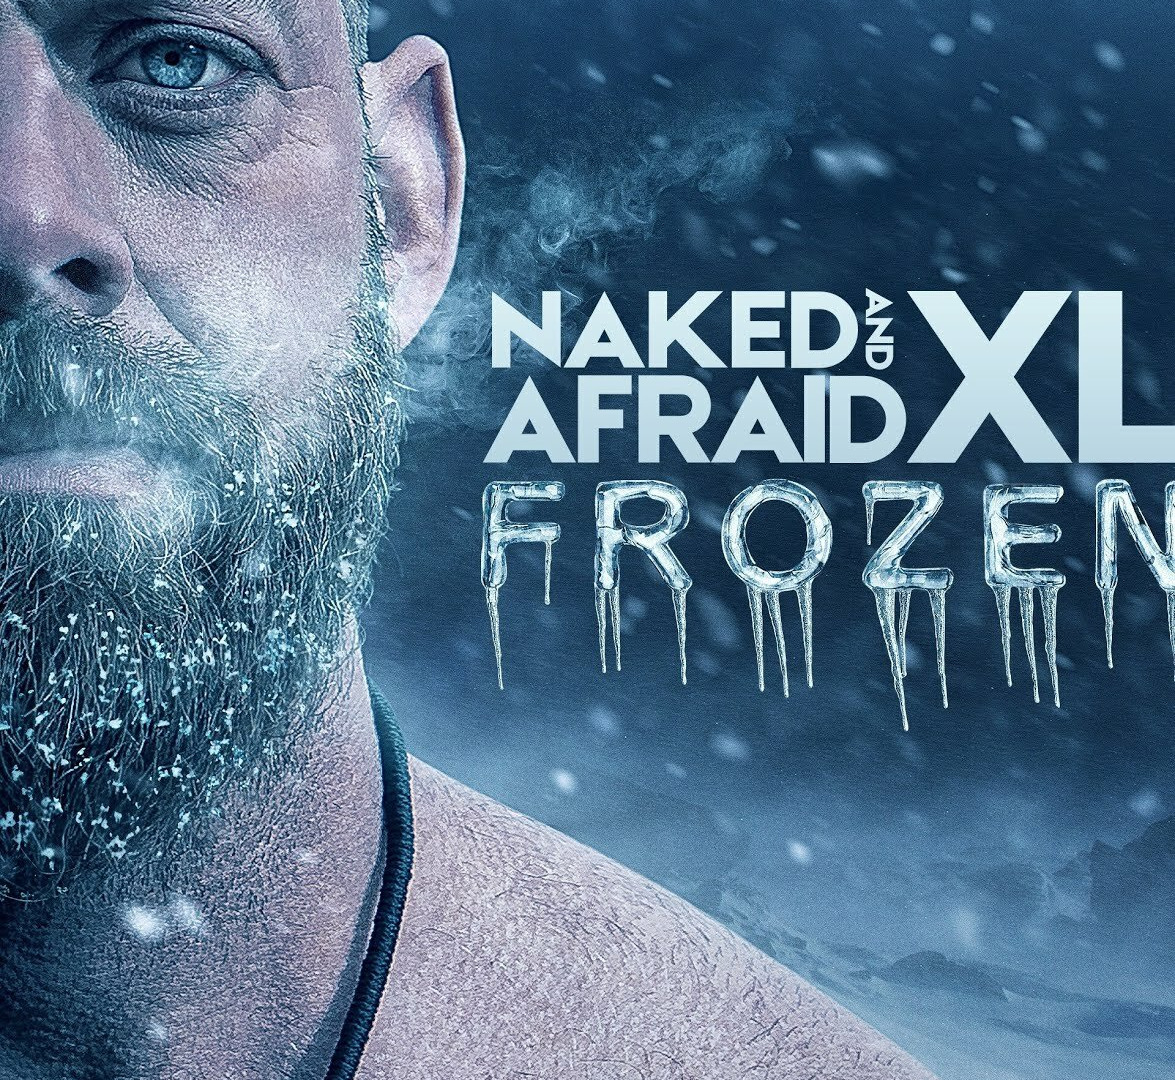 Show Naked and Afraid XL Frozen